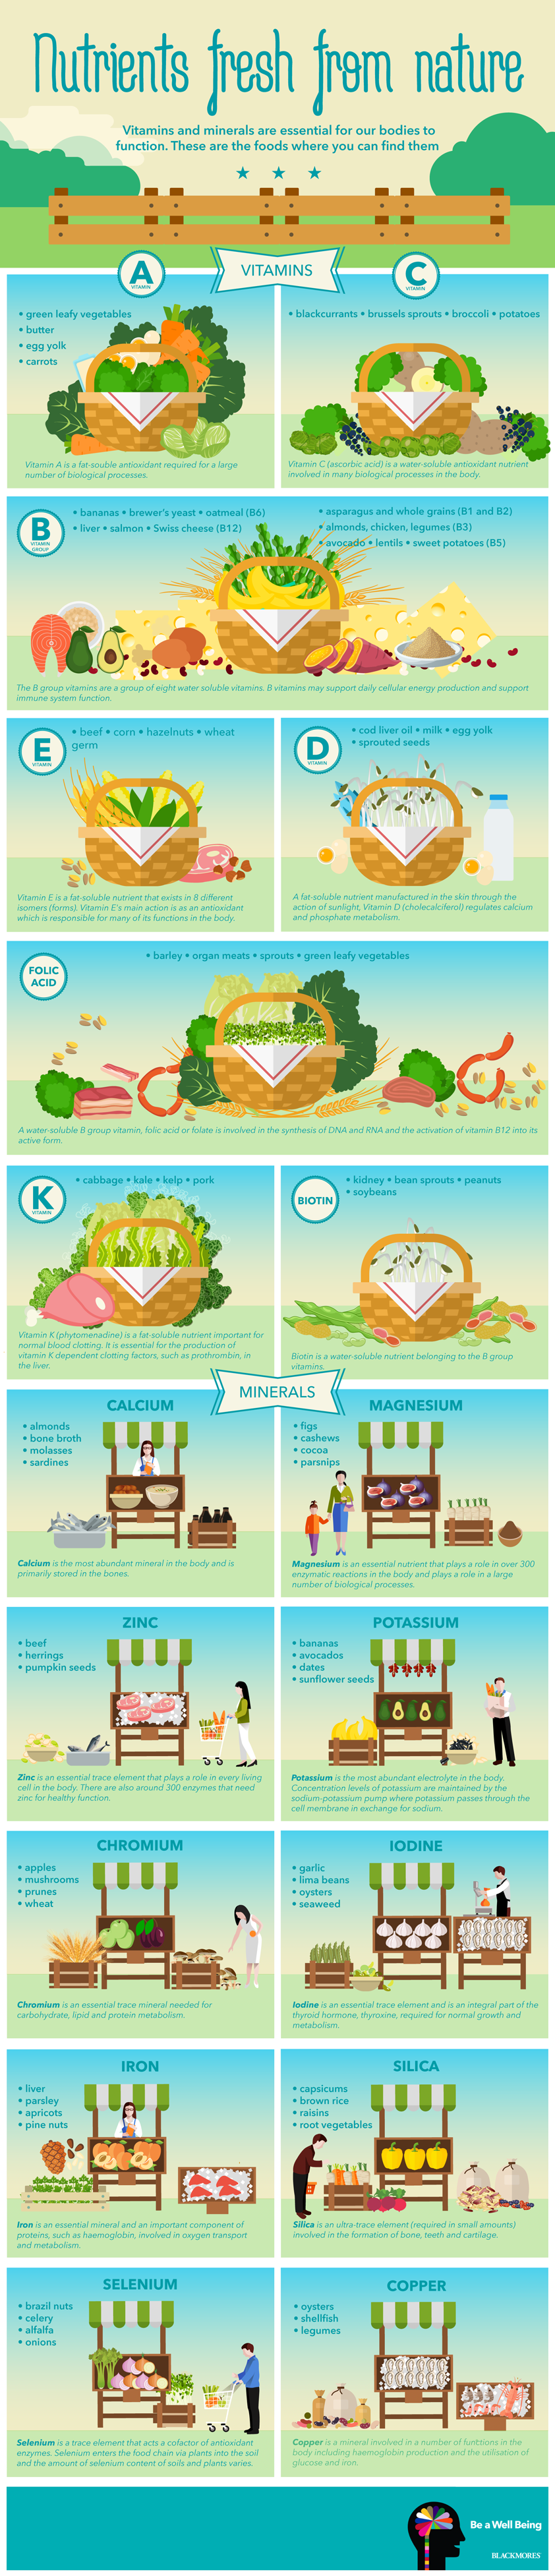 Blackmores Vitamins and Minerals infographic